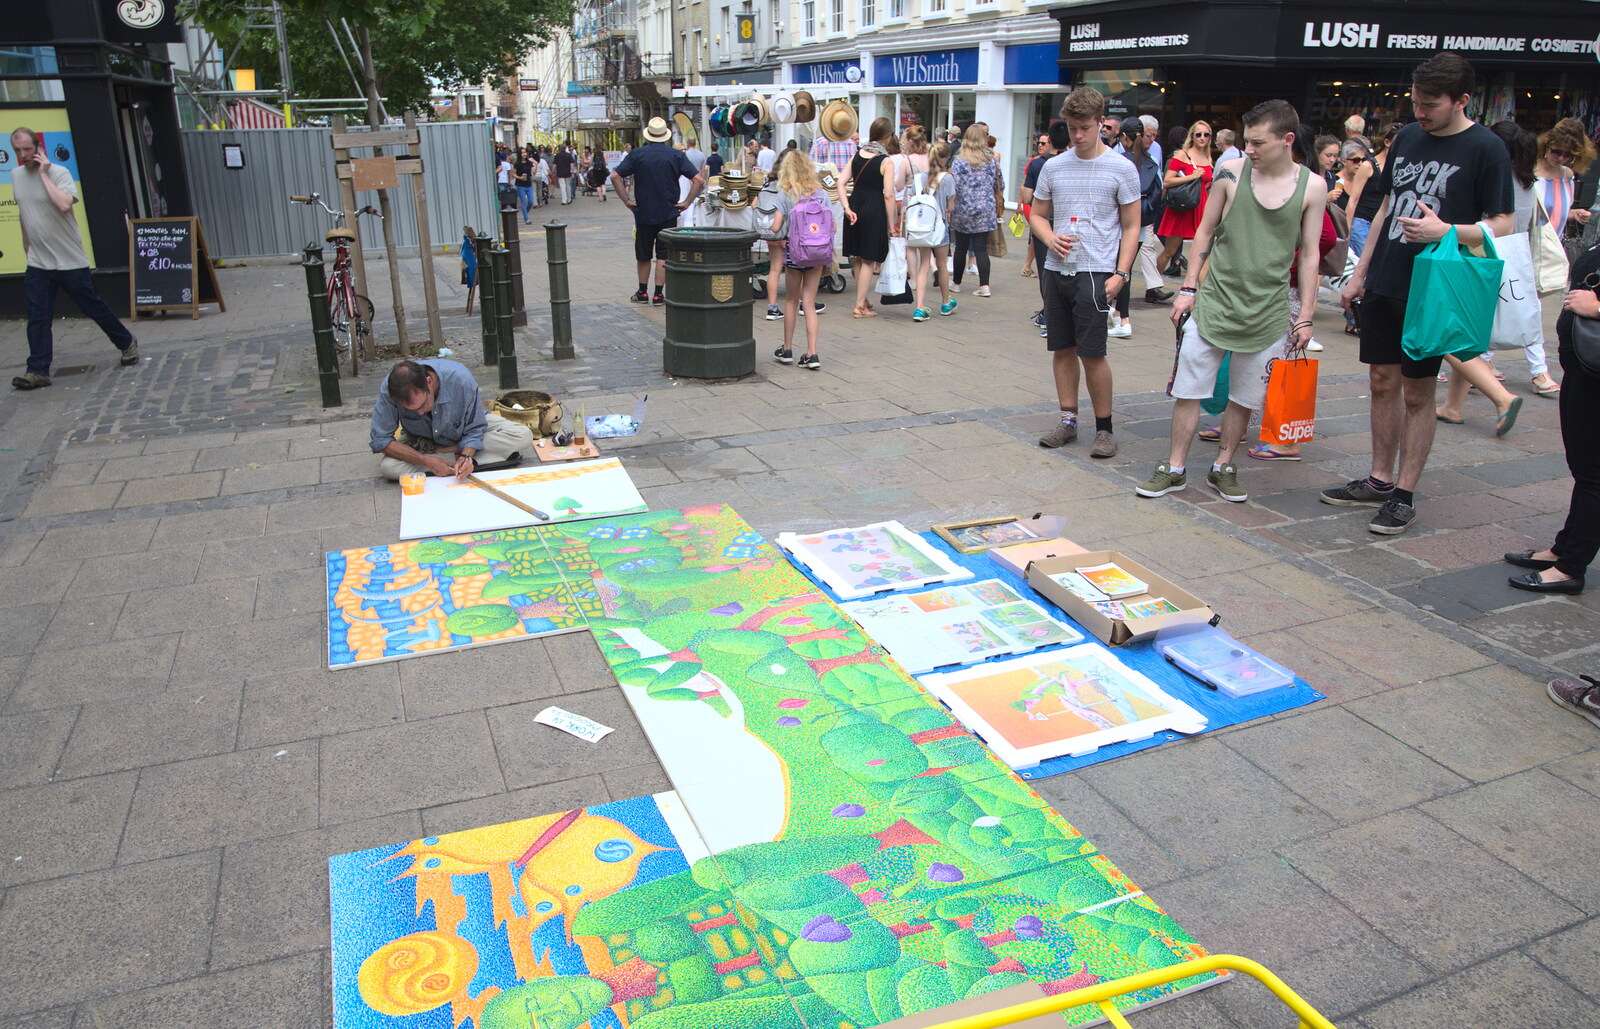 A pavement artist does his thing from Isobel's Choral Flash Mob, Norwich, Norfolk - 17th June 2017